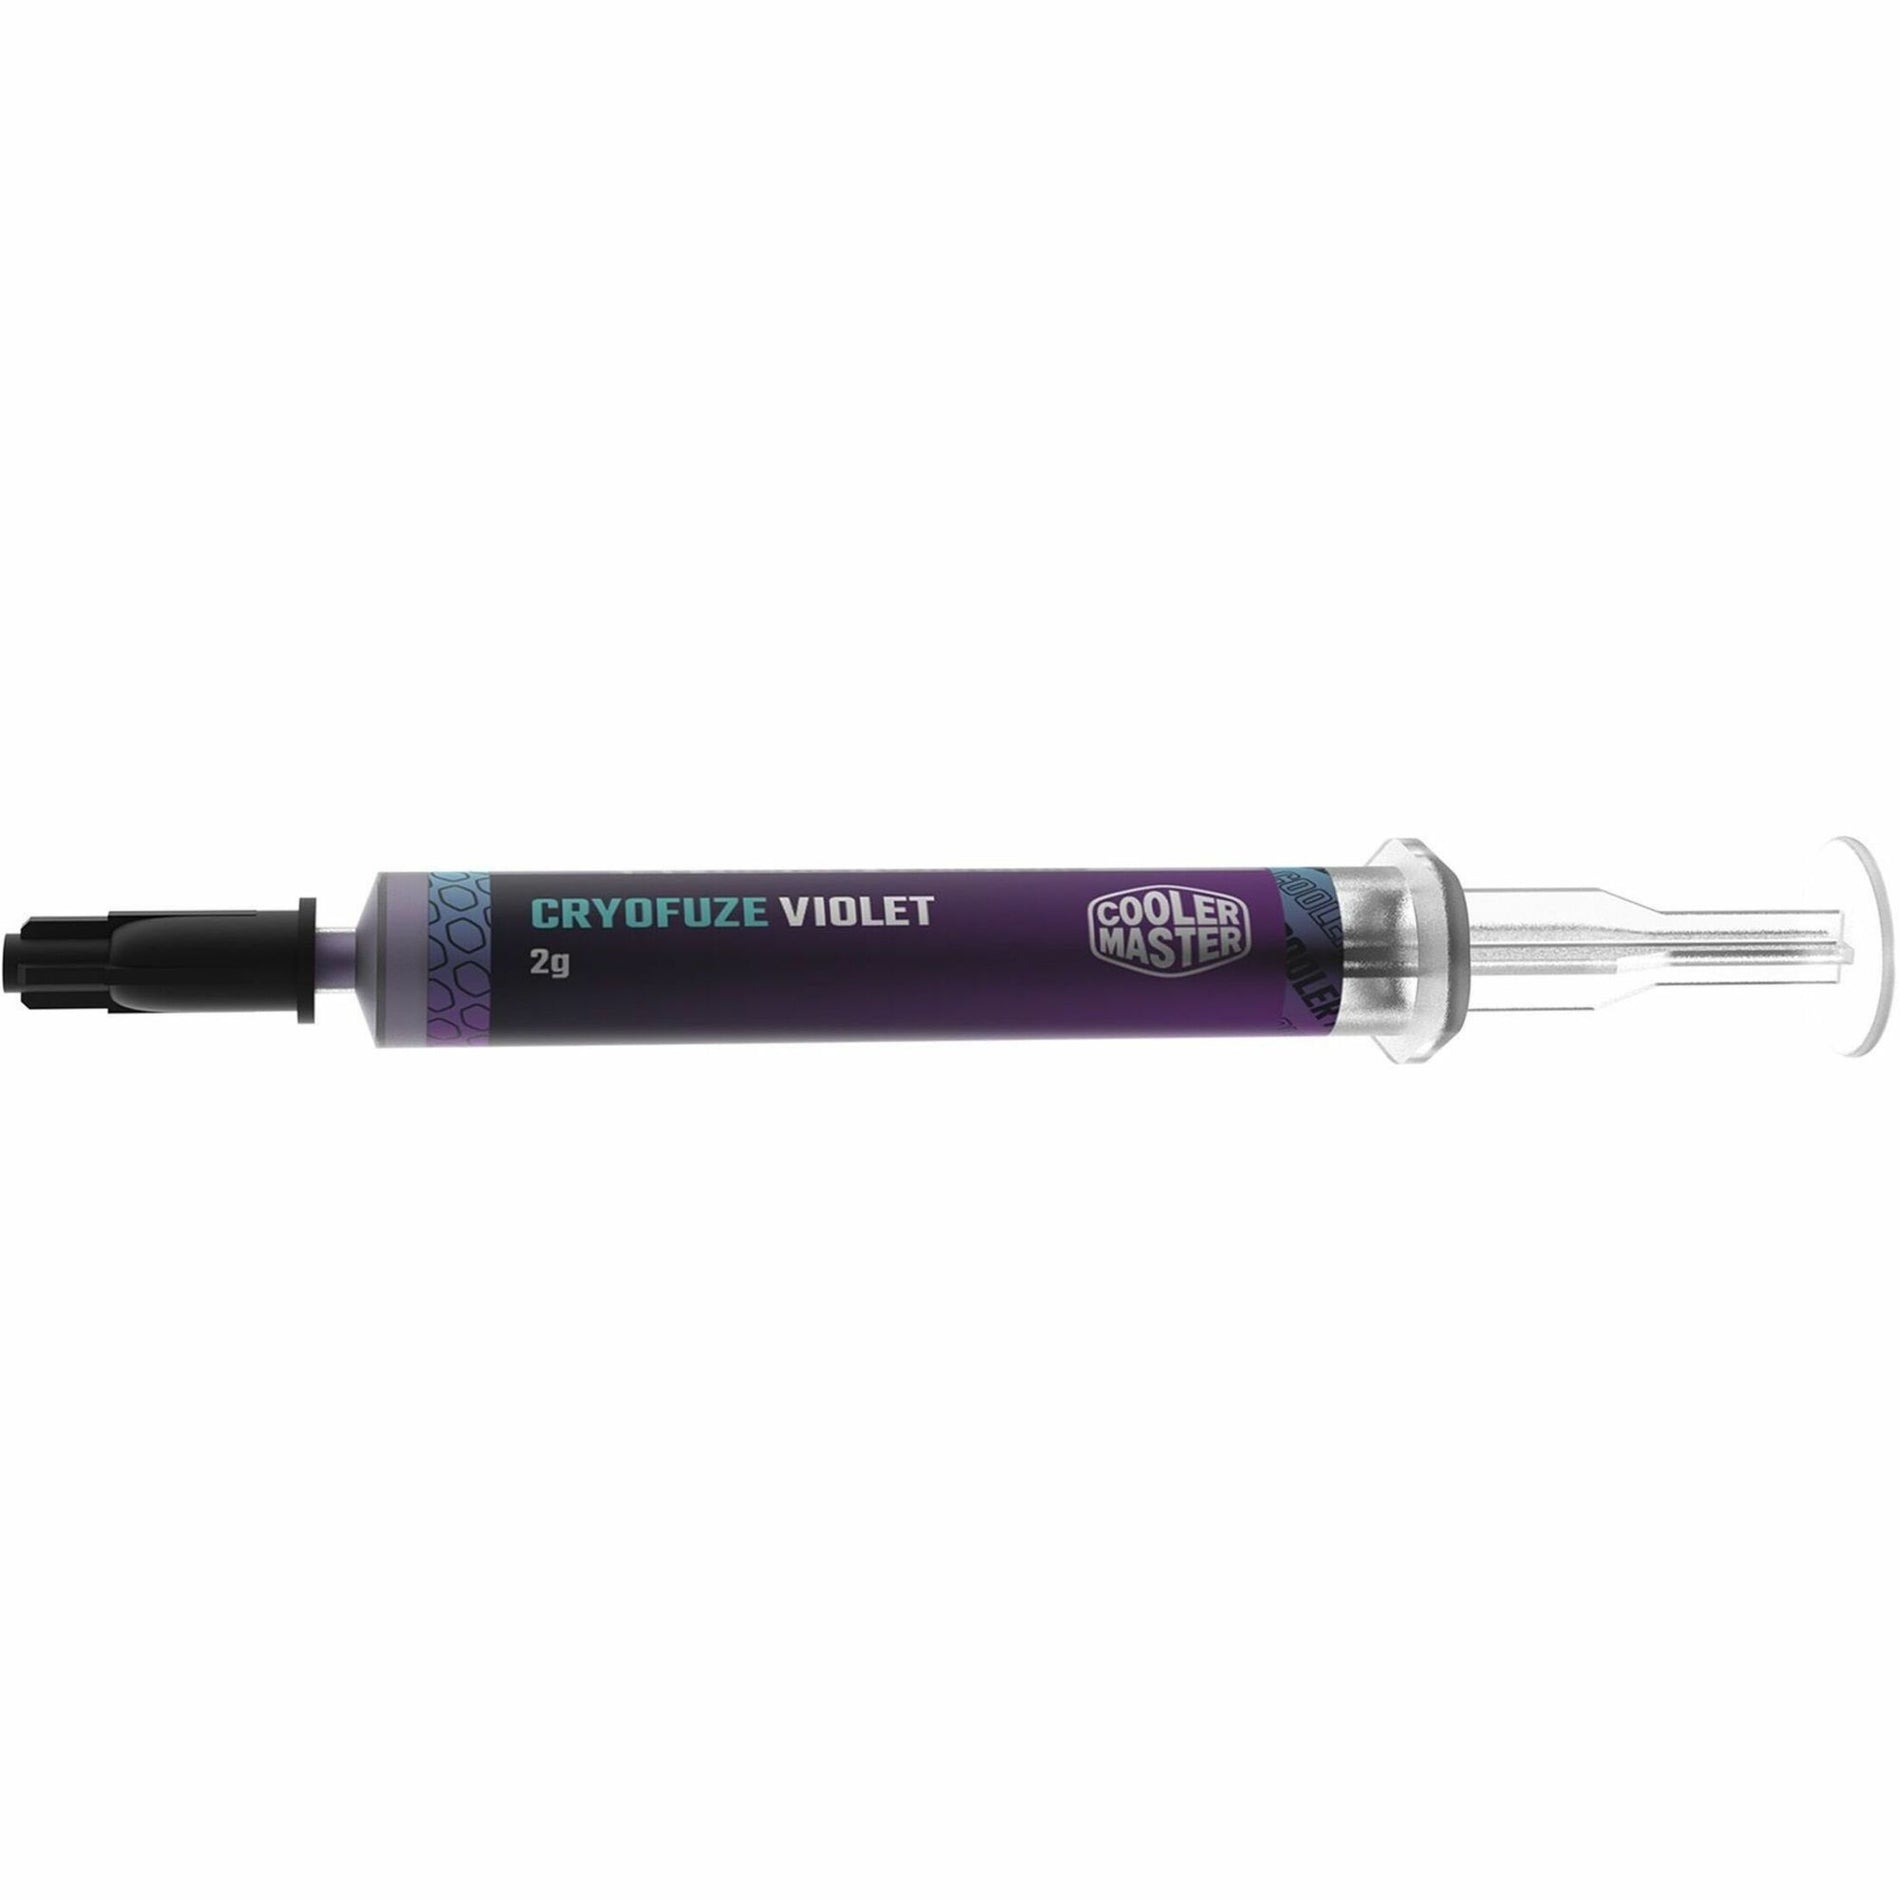 Cooler Master MGY-NOSG-N07M-R1 Thermal Grease Cryofuze, High Performance Cooling Solution